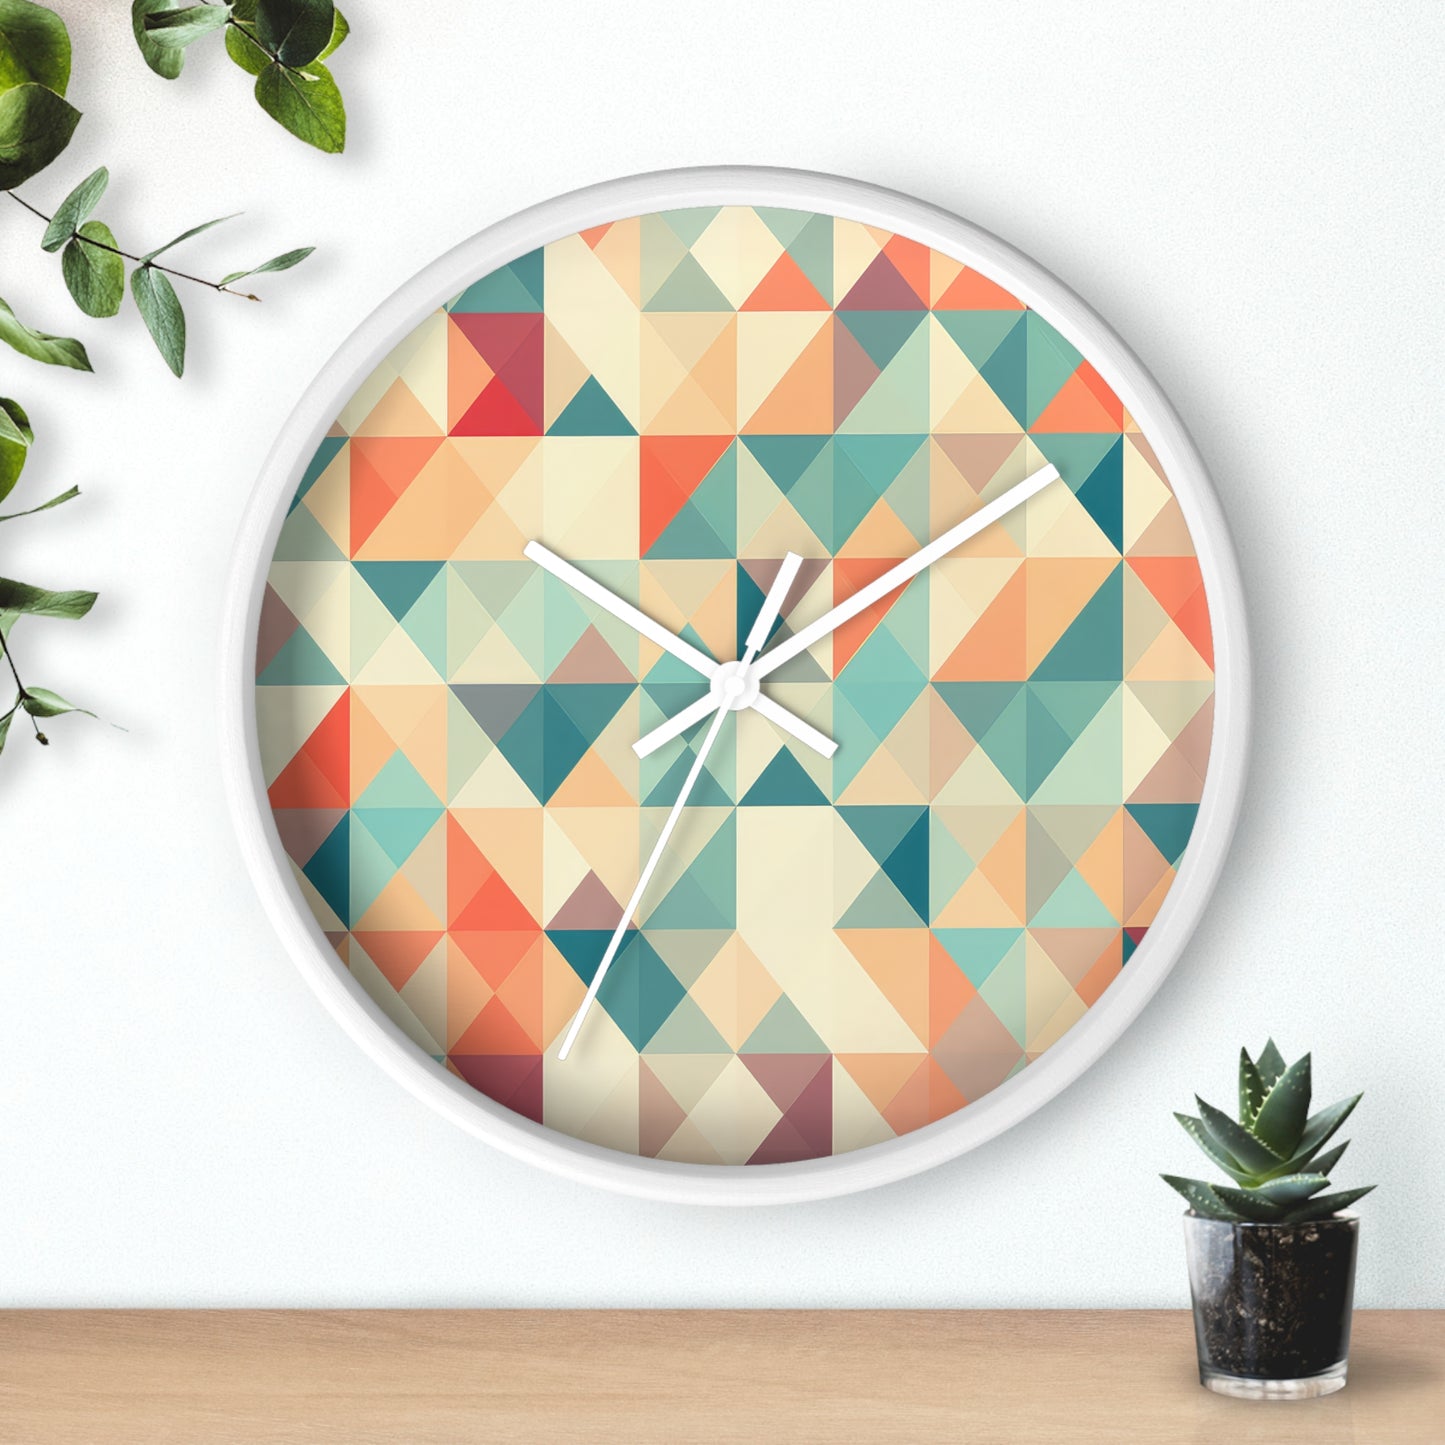 Tranquil Mosaic Design Wall Clock, an artful tile-inspired timepiece perfect for contemporary design wall clock enthusiasts, showcasing unique mosaic embellishments and precision time-telling features for chic home accessories.